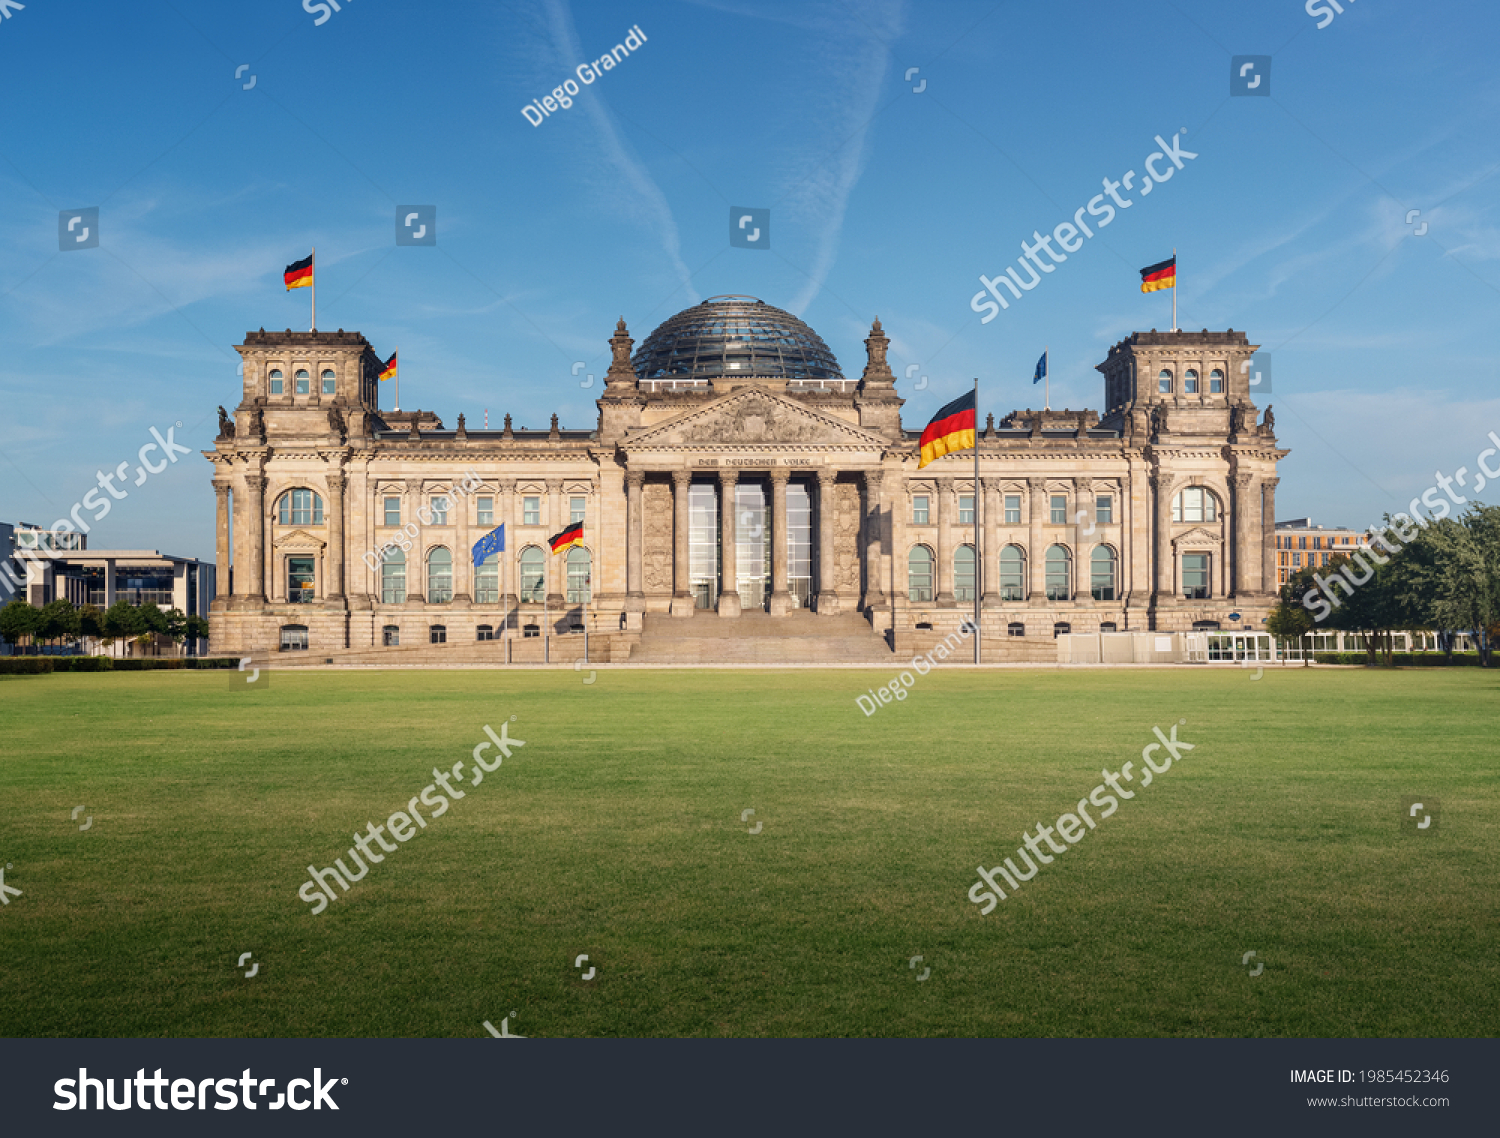 German Parliament (Bundestag) - Reichstag Building - Text says: To the German People - Berlin, Germany #1985452346